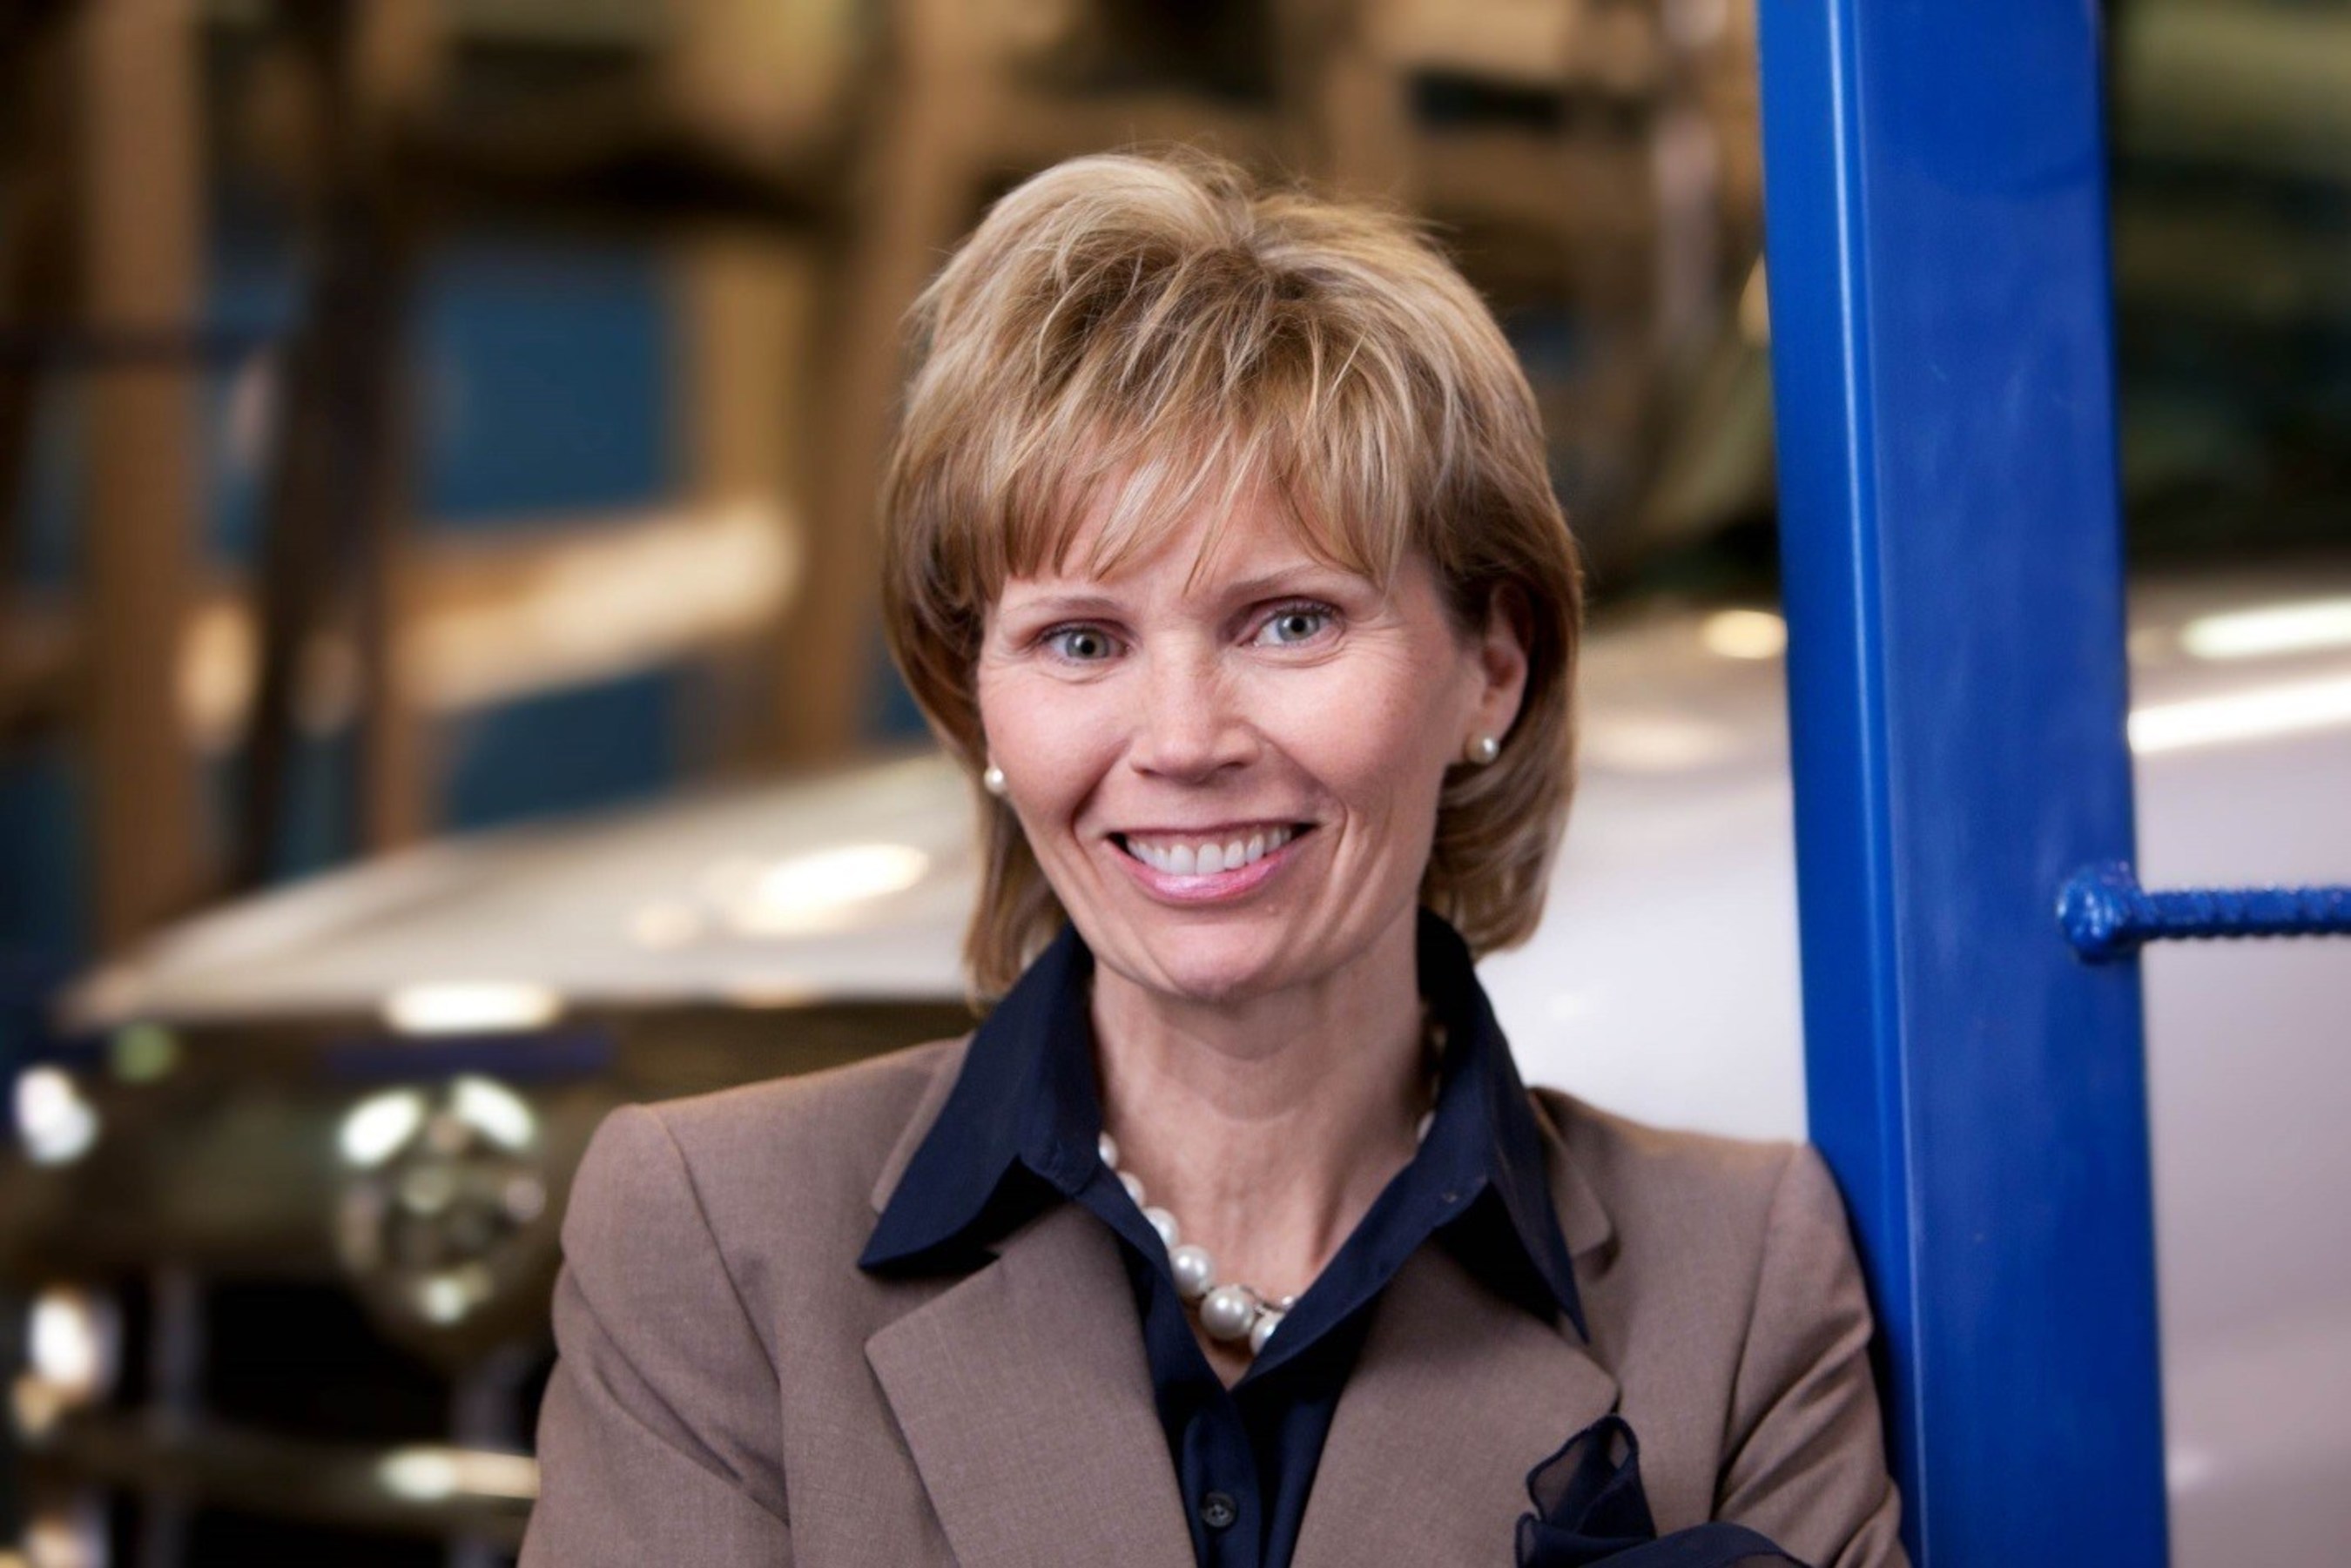 Kathleen McCann is appointed Chairman of the Board and CEO of United Road Services.